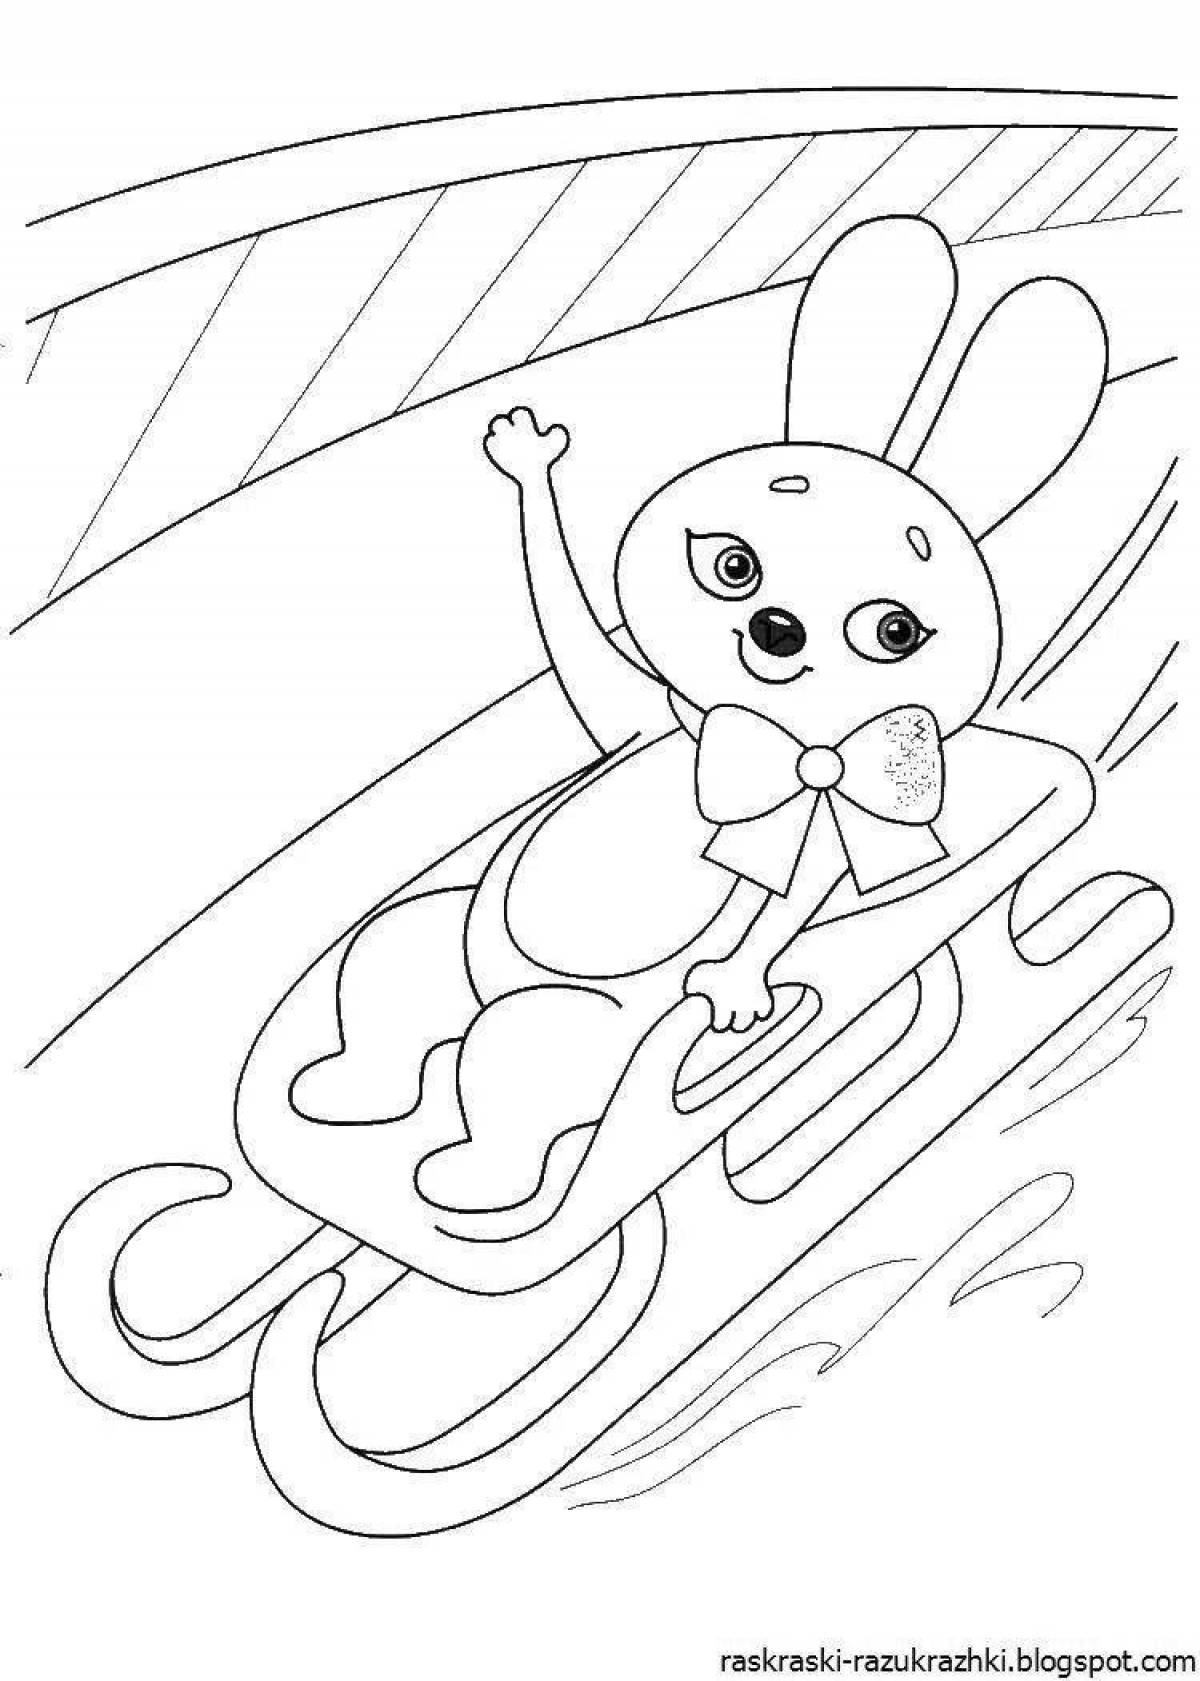 Fun coloring book for luge